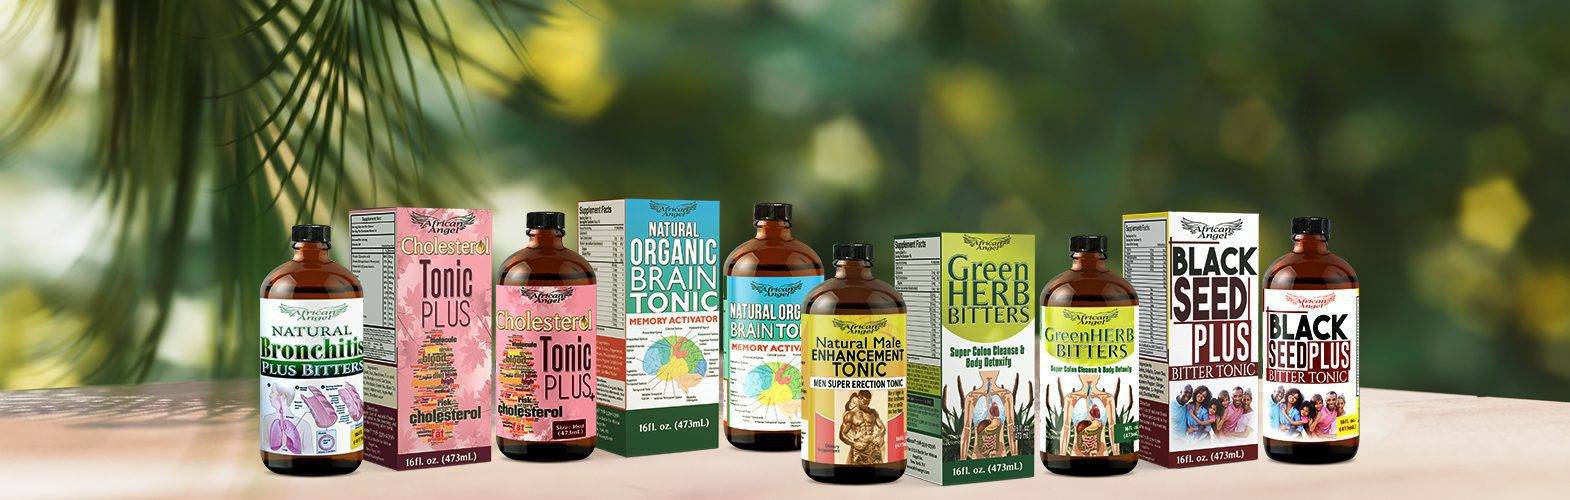 Natural Herbal Tonics and Herbal Health Products